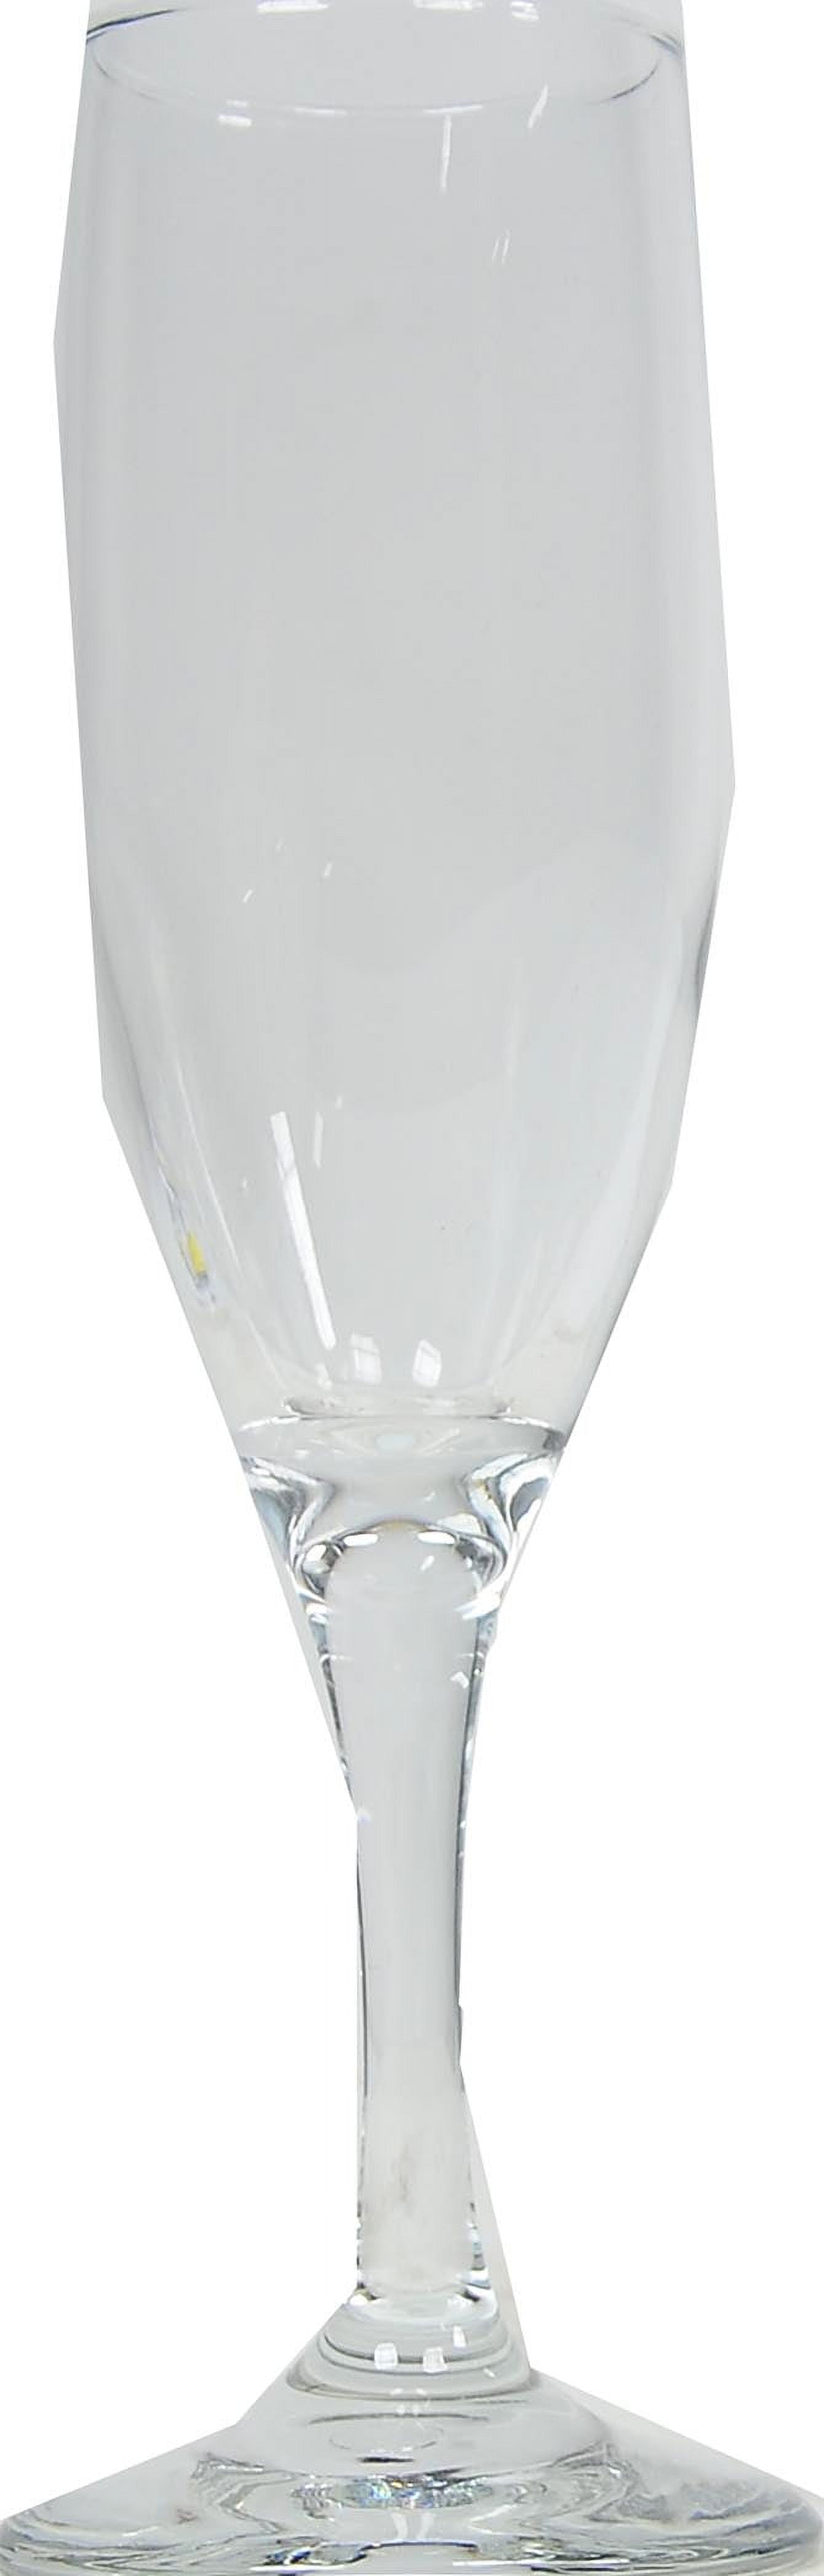 OGGI Fizz Insulated 6 oz Champagne Flute Tumbler w/ Lid Marble Pattern  Mimosa